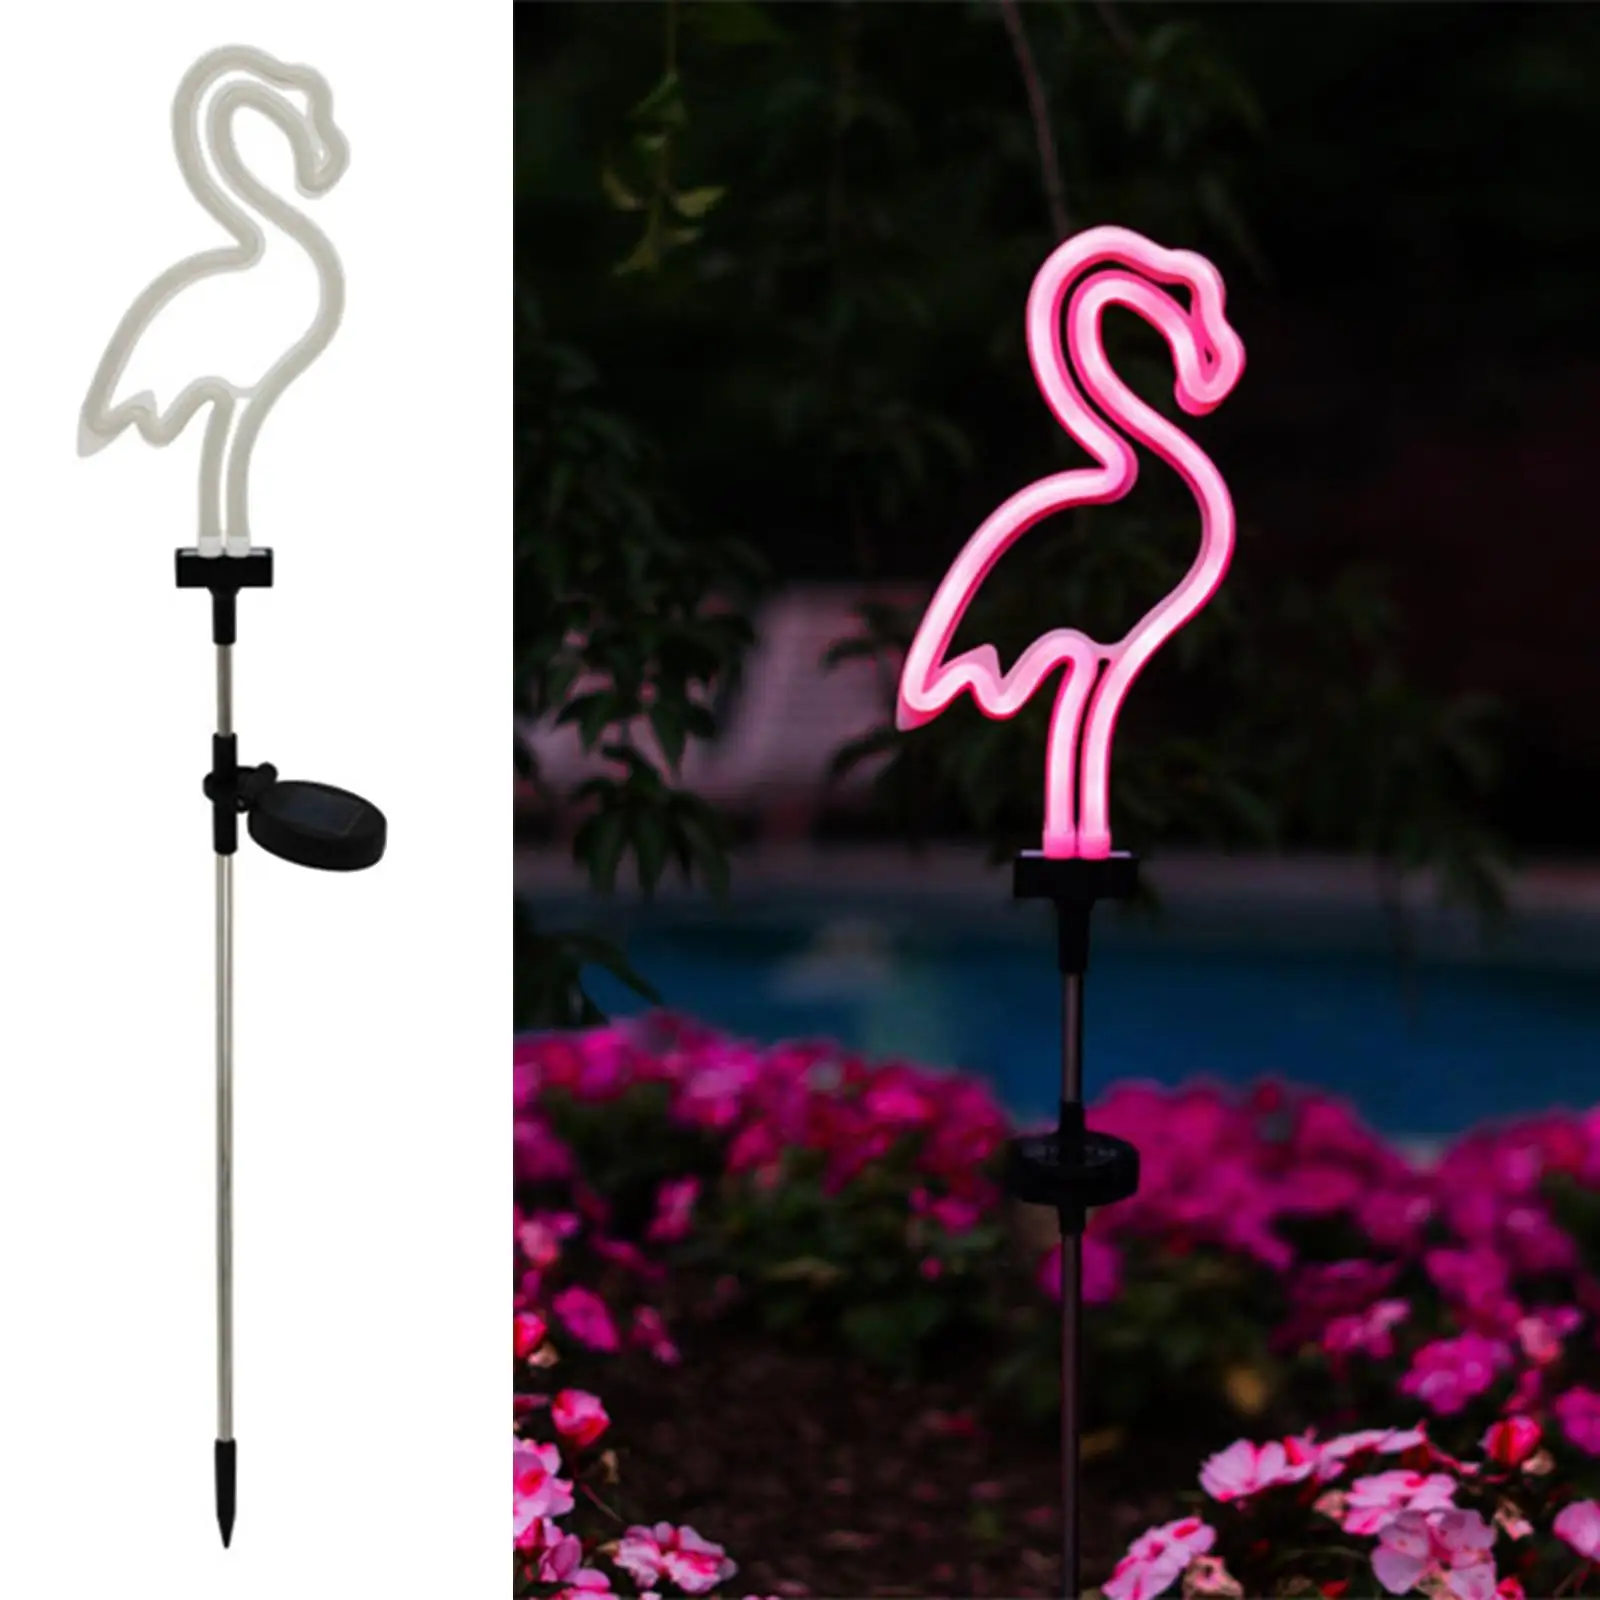 

Solar-Powered Light Flamingo Landscape Light for Lawn Fence Garden Outdoor Pathway